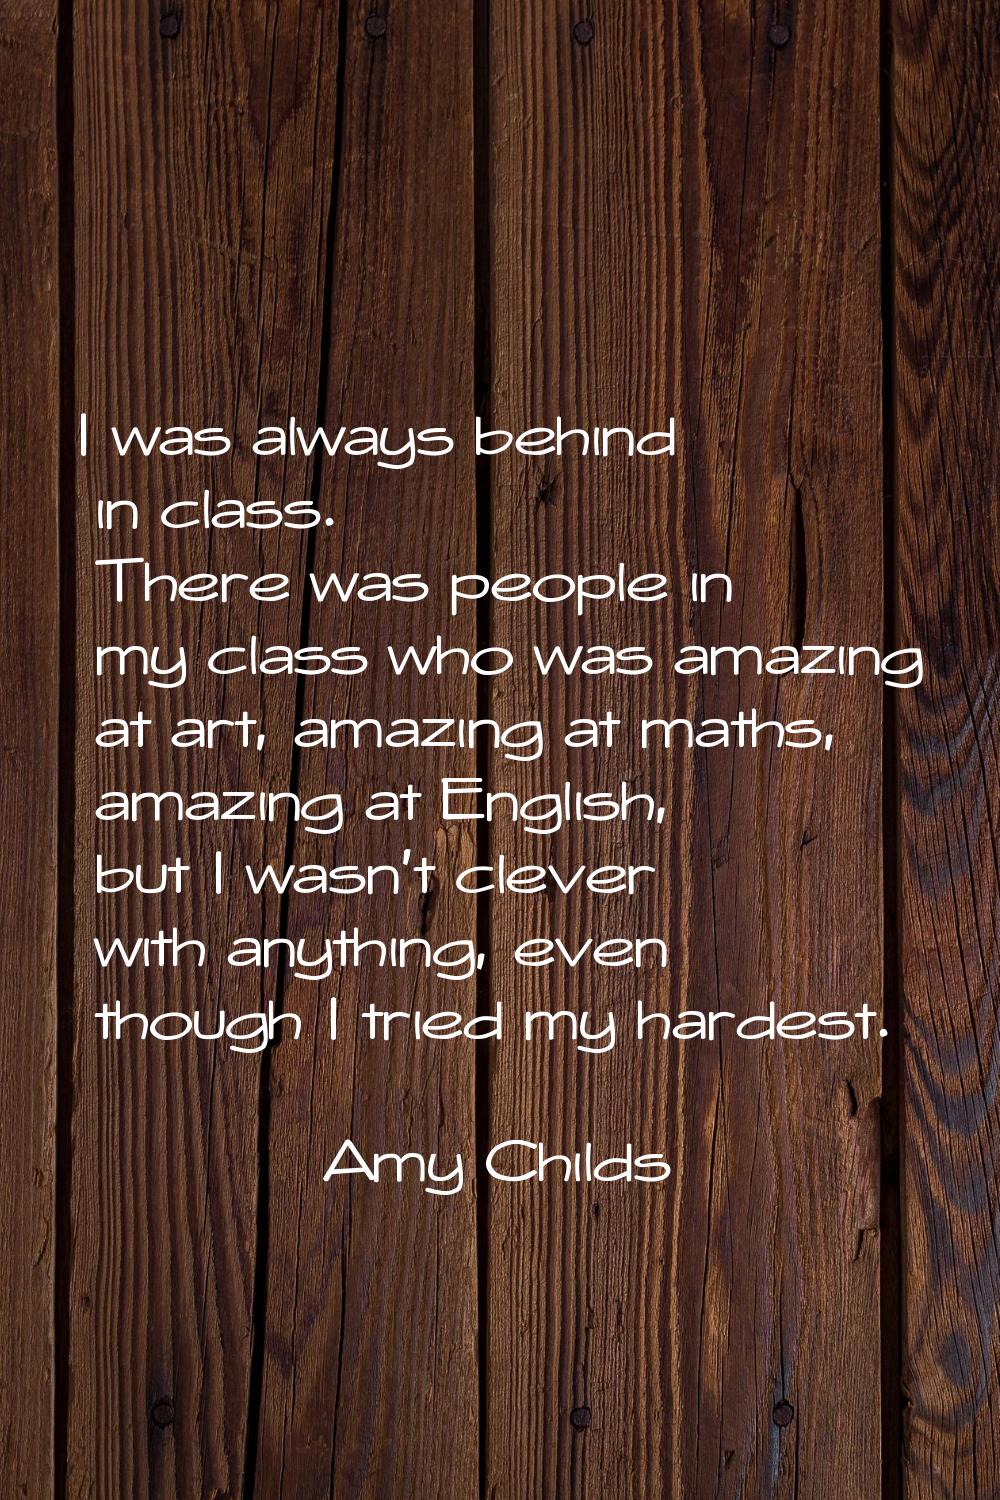 I was always behind in class. There was people in my class who was amazing at art, amazing at maths